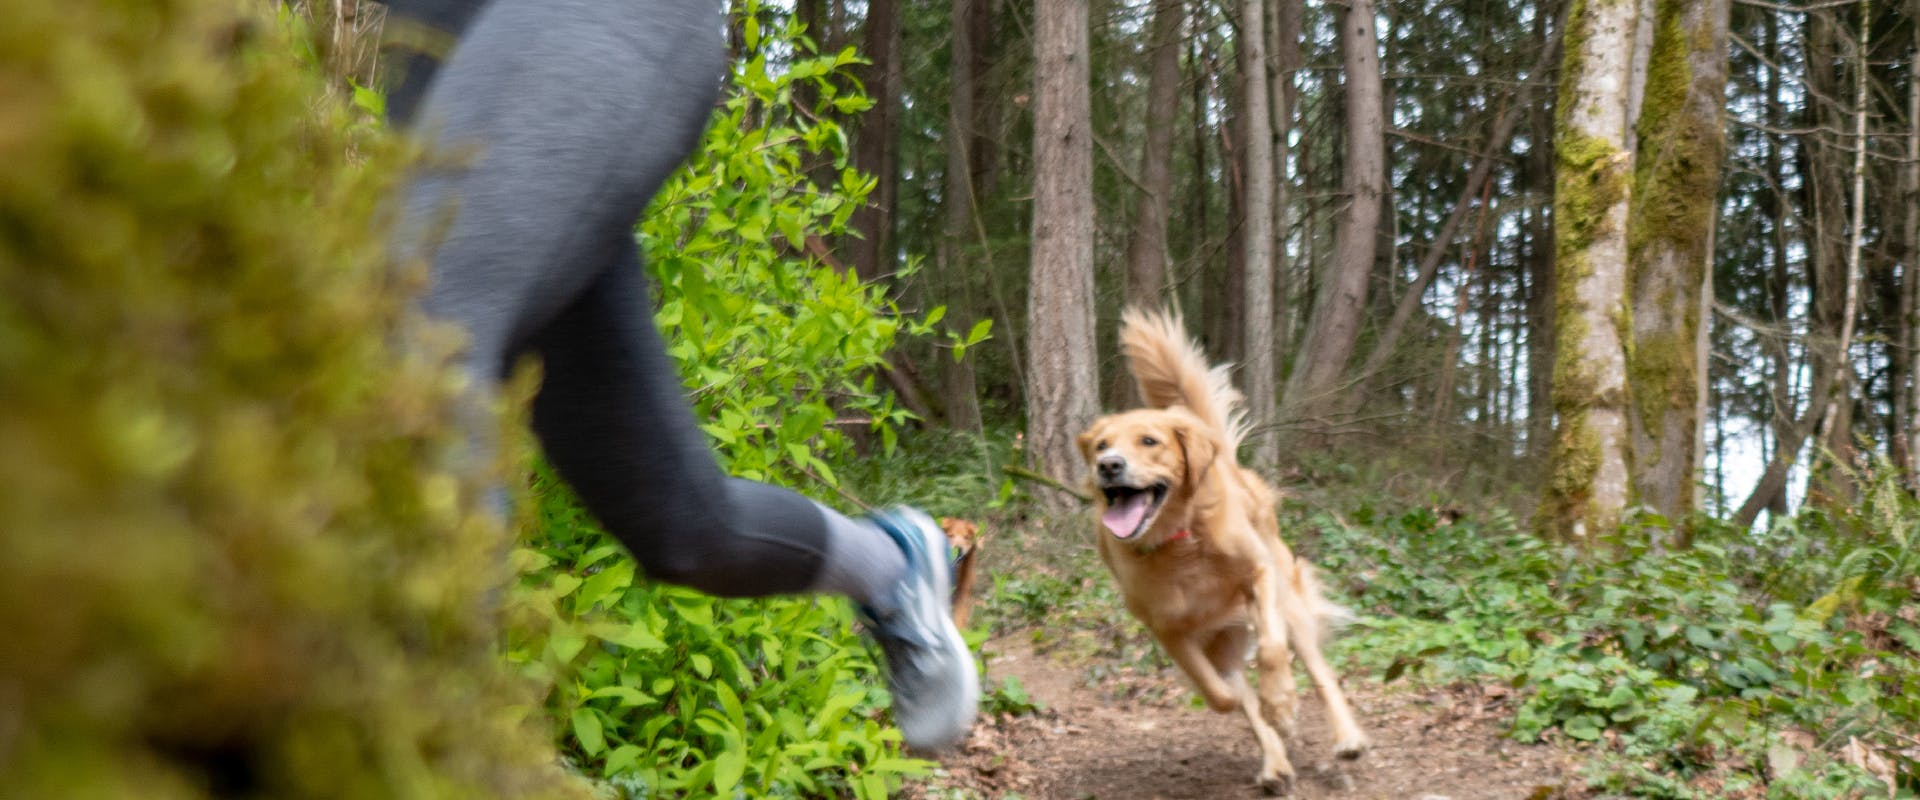 A dog chases its owner through the forest.